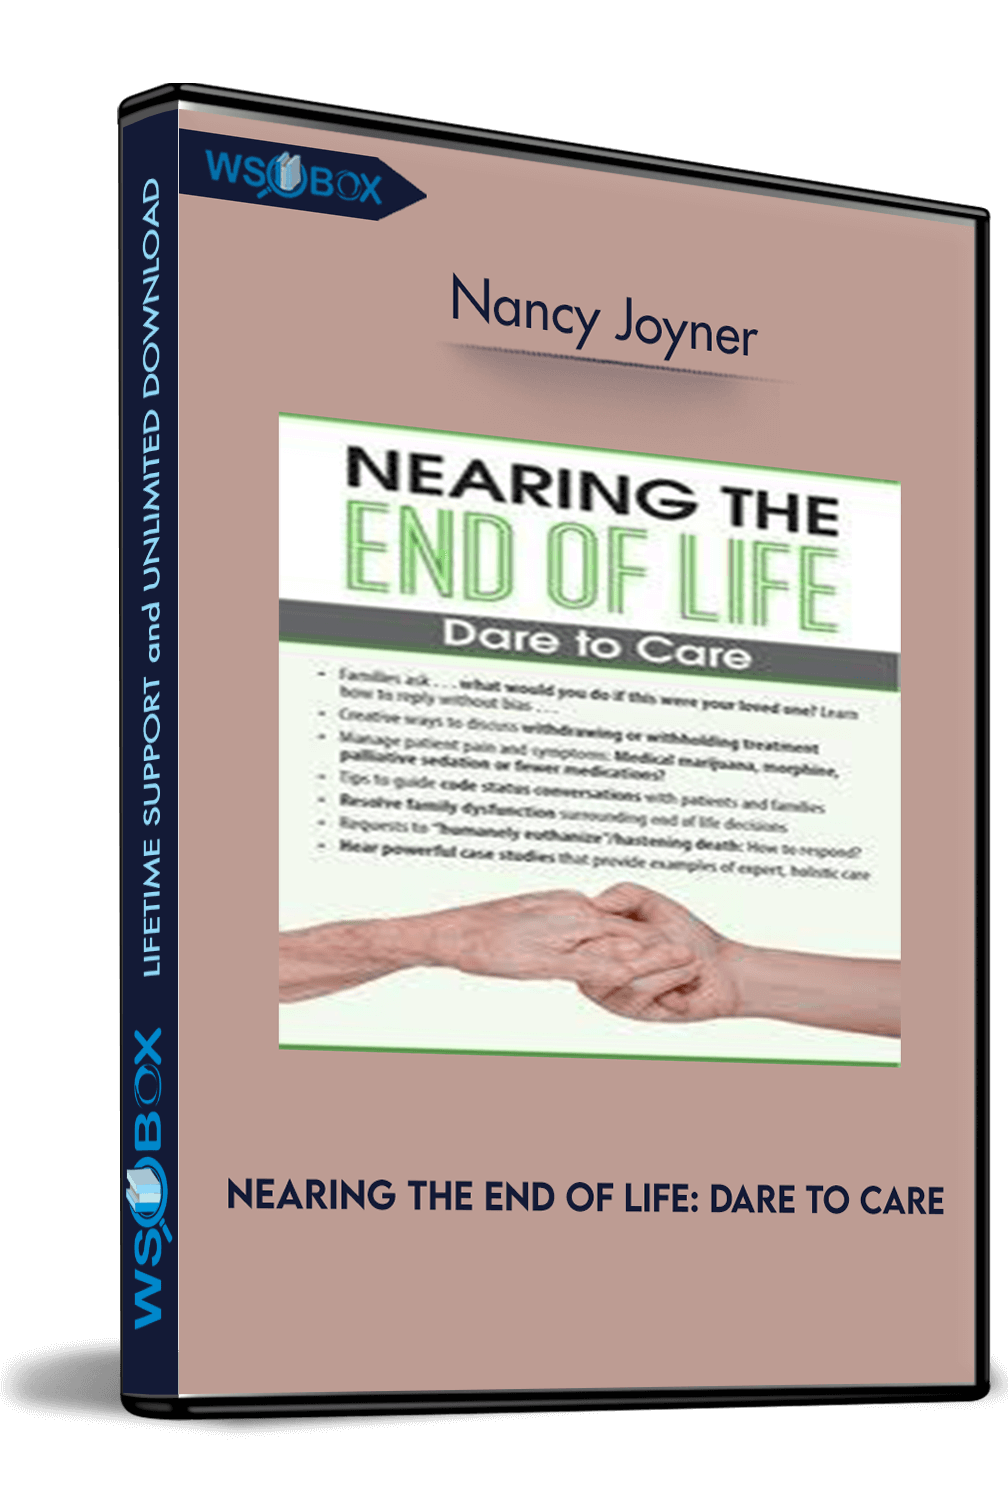 nearing-the-end-of-life-dare-to-care-nancy-joyner